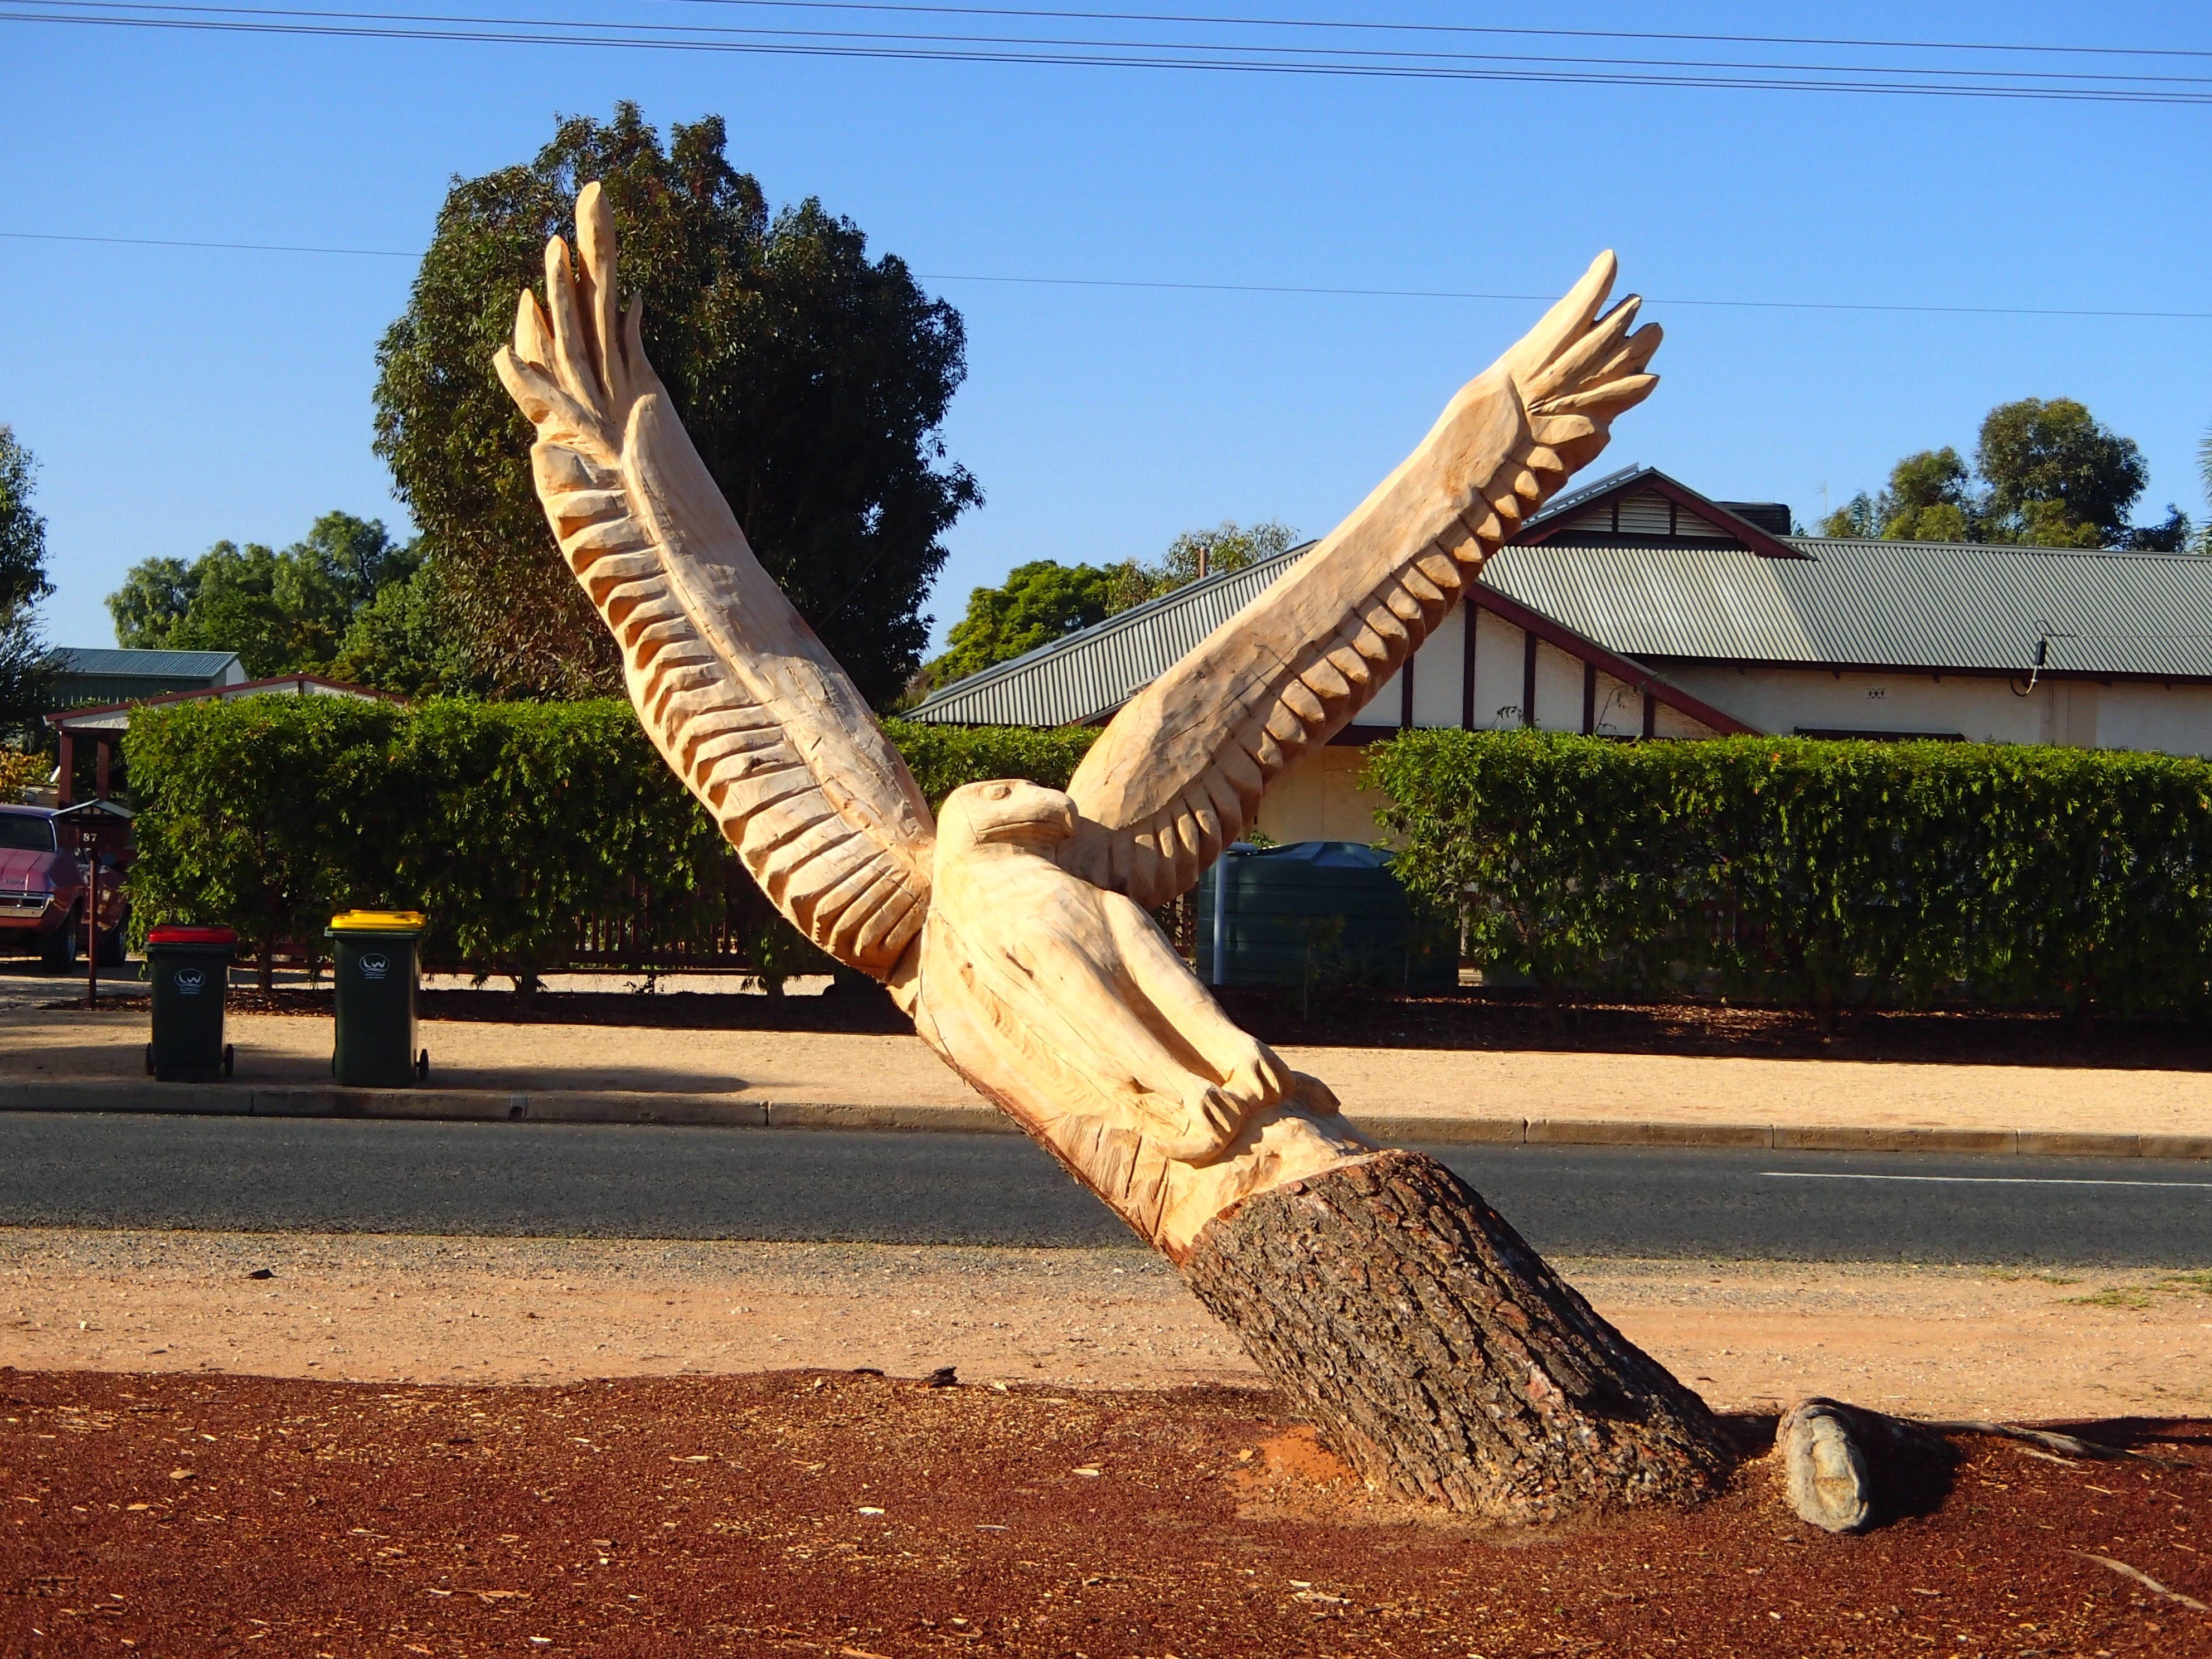 Loxton Tree sculptures - Find Attractions